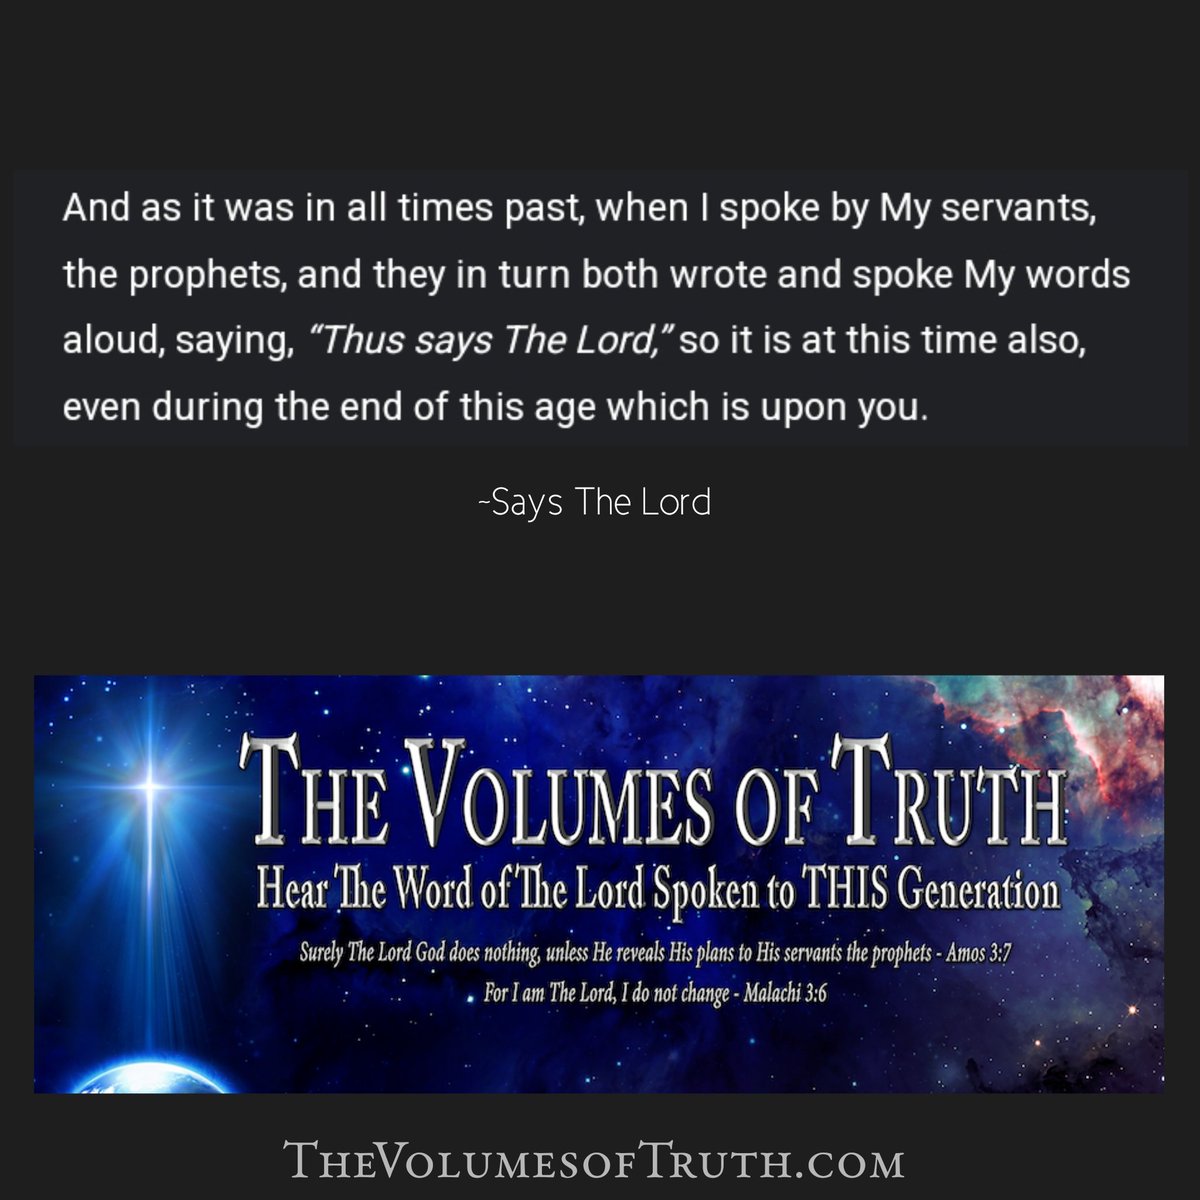 📖 Excerpt from 'The Word of My Mouth': thevolumesoftruth.com/The_Word_of_My…

▶️ Video: youtube.com/watch?v=1Eu7ud…

#TheVolumesofTruth #wordofgod #truth #newscriptures #ThussaysTheLord #Prophecy #Amos3verse7 #modernscripture #wordofTheLord #EndOfTheAge #endtimes #TrumpetCallofGod #LettersfromGod